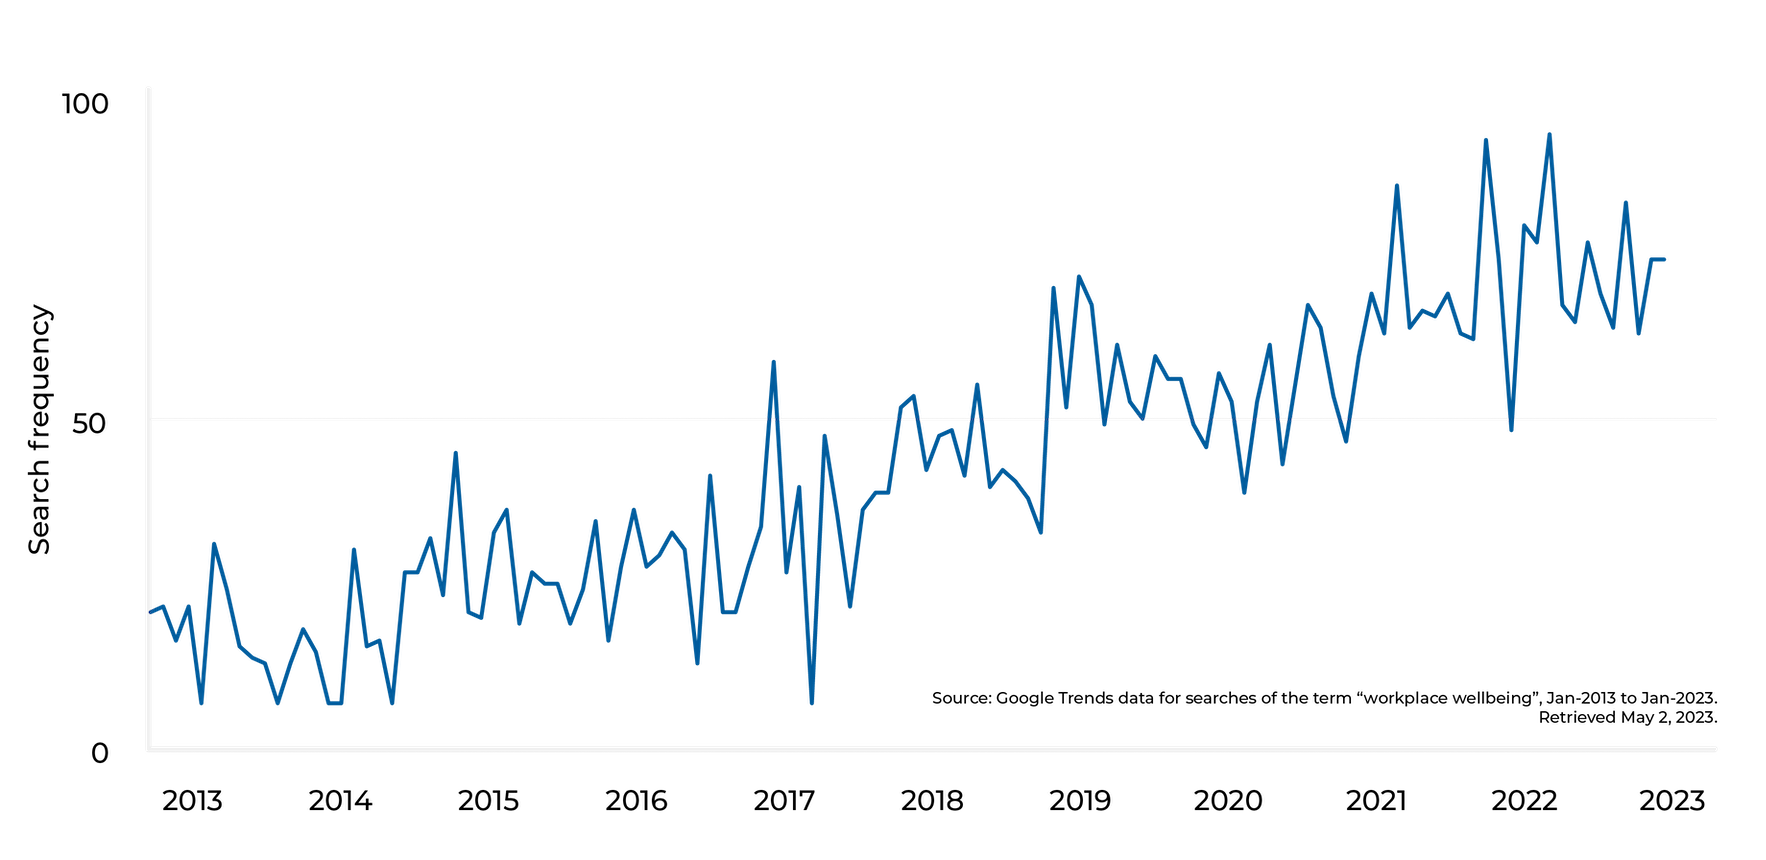 Line graph with 0-100 on the y axis and time period 2013-2023 on the x axis, displaying Google Trends data for the term "workplace wellbeing". Graph trends to growth over time.